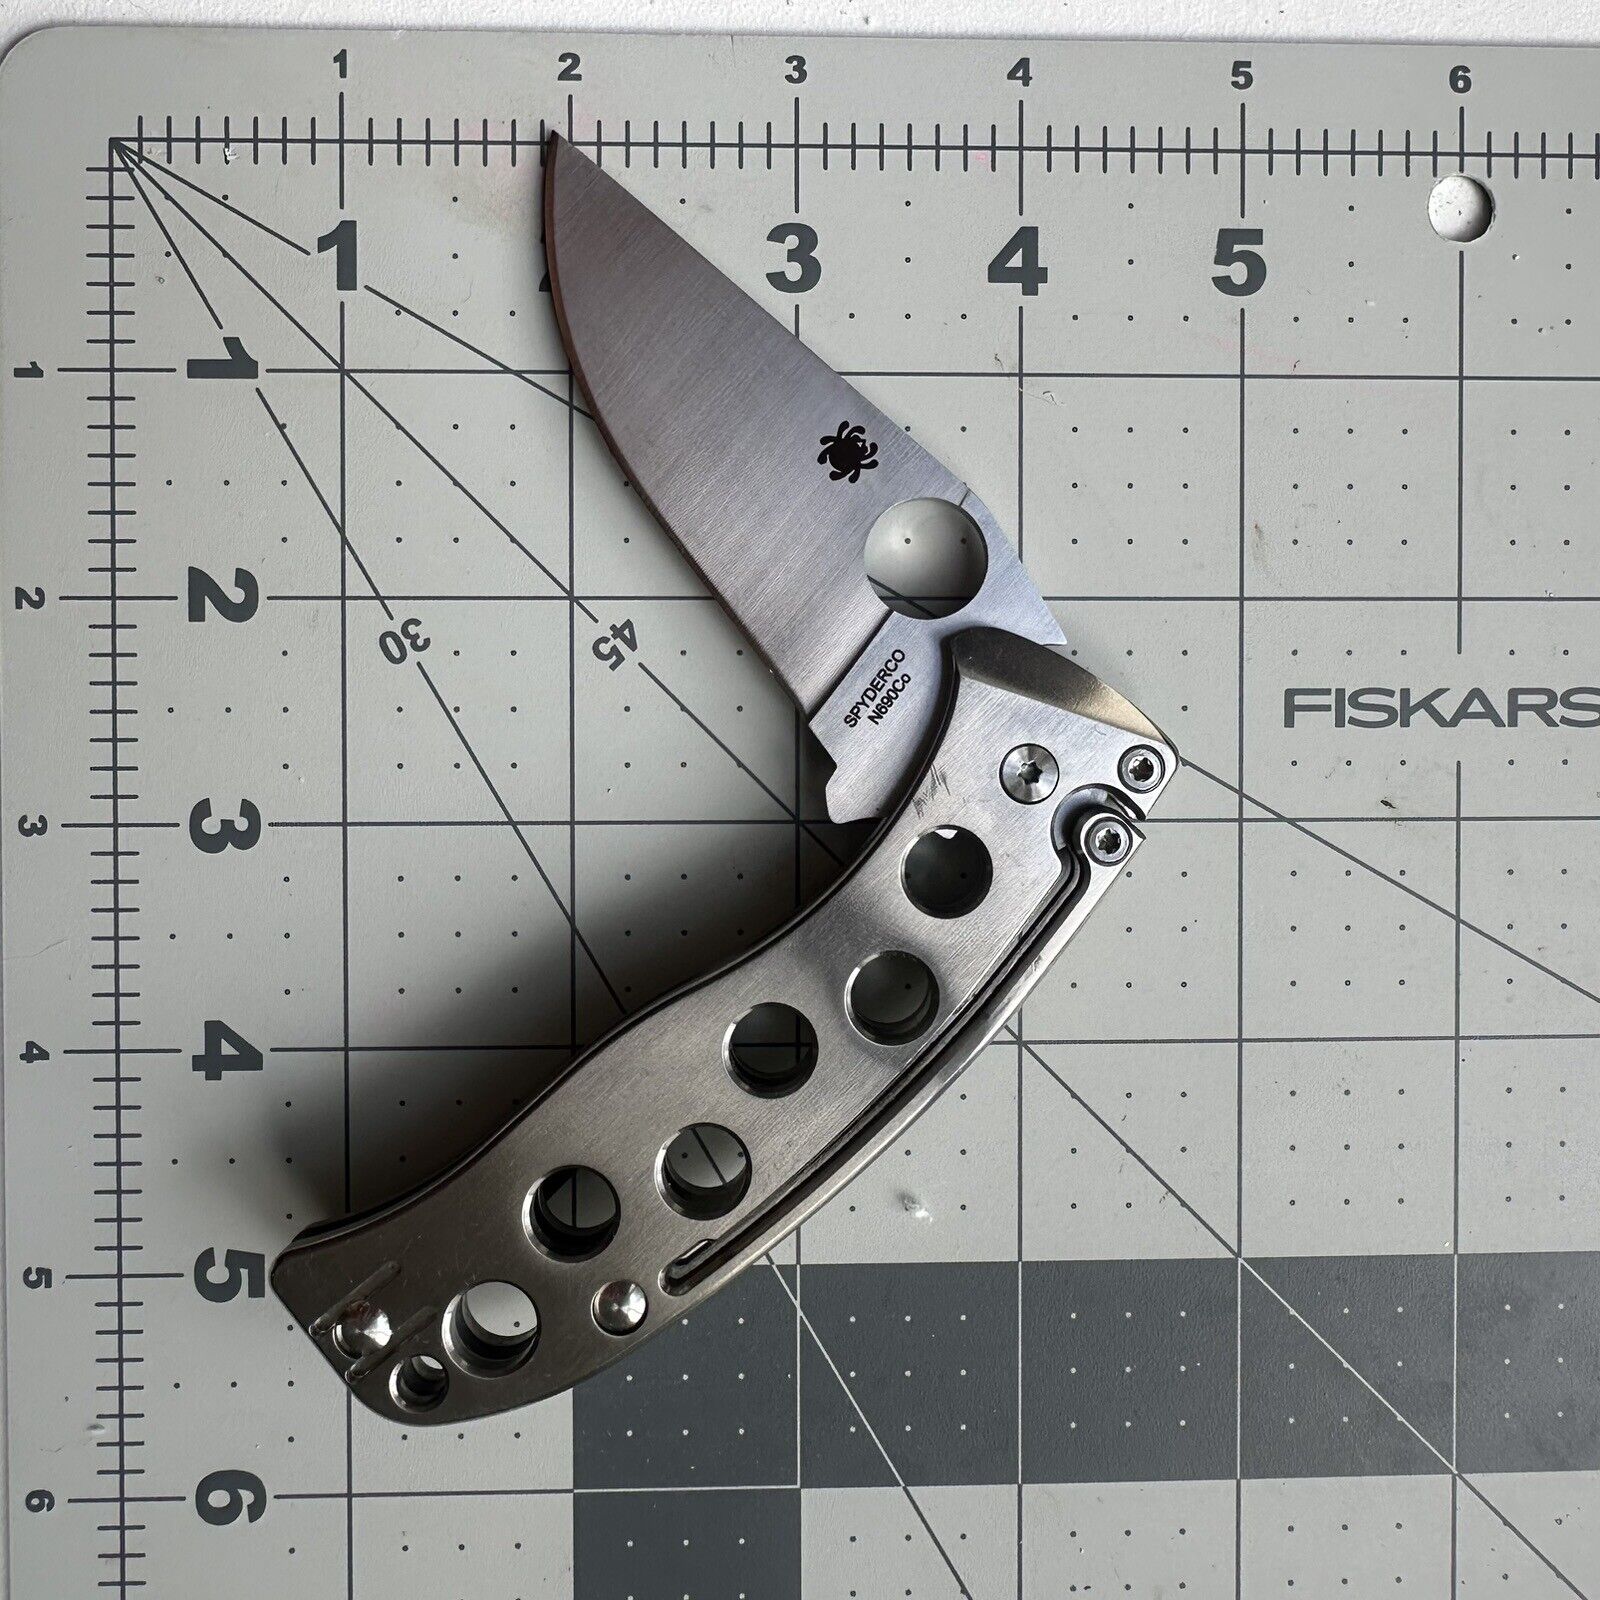 Spyderco PITS Slip Joint Knife 2.97in N690Co Blade with Titanium Handle